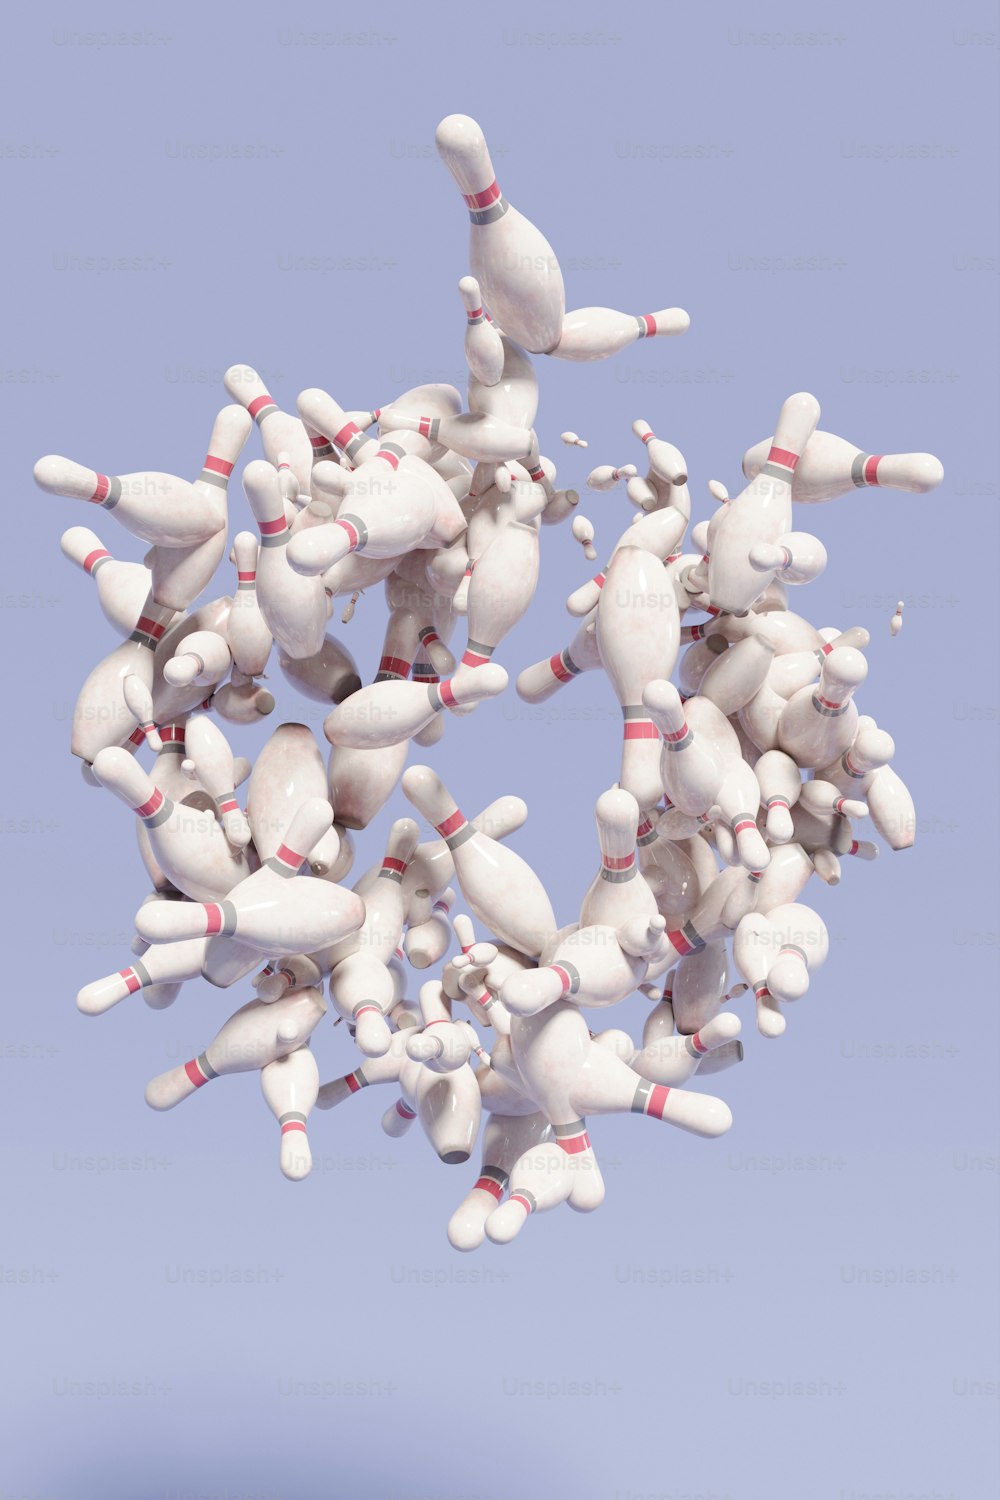 a bunch of bowling pins flying through the air